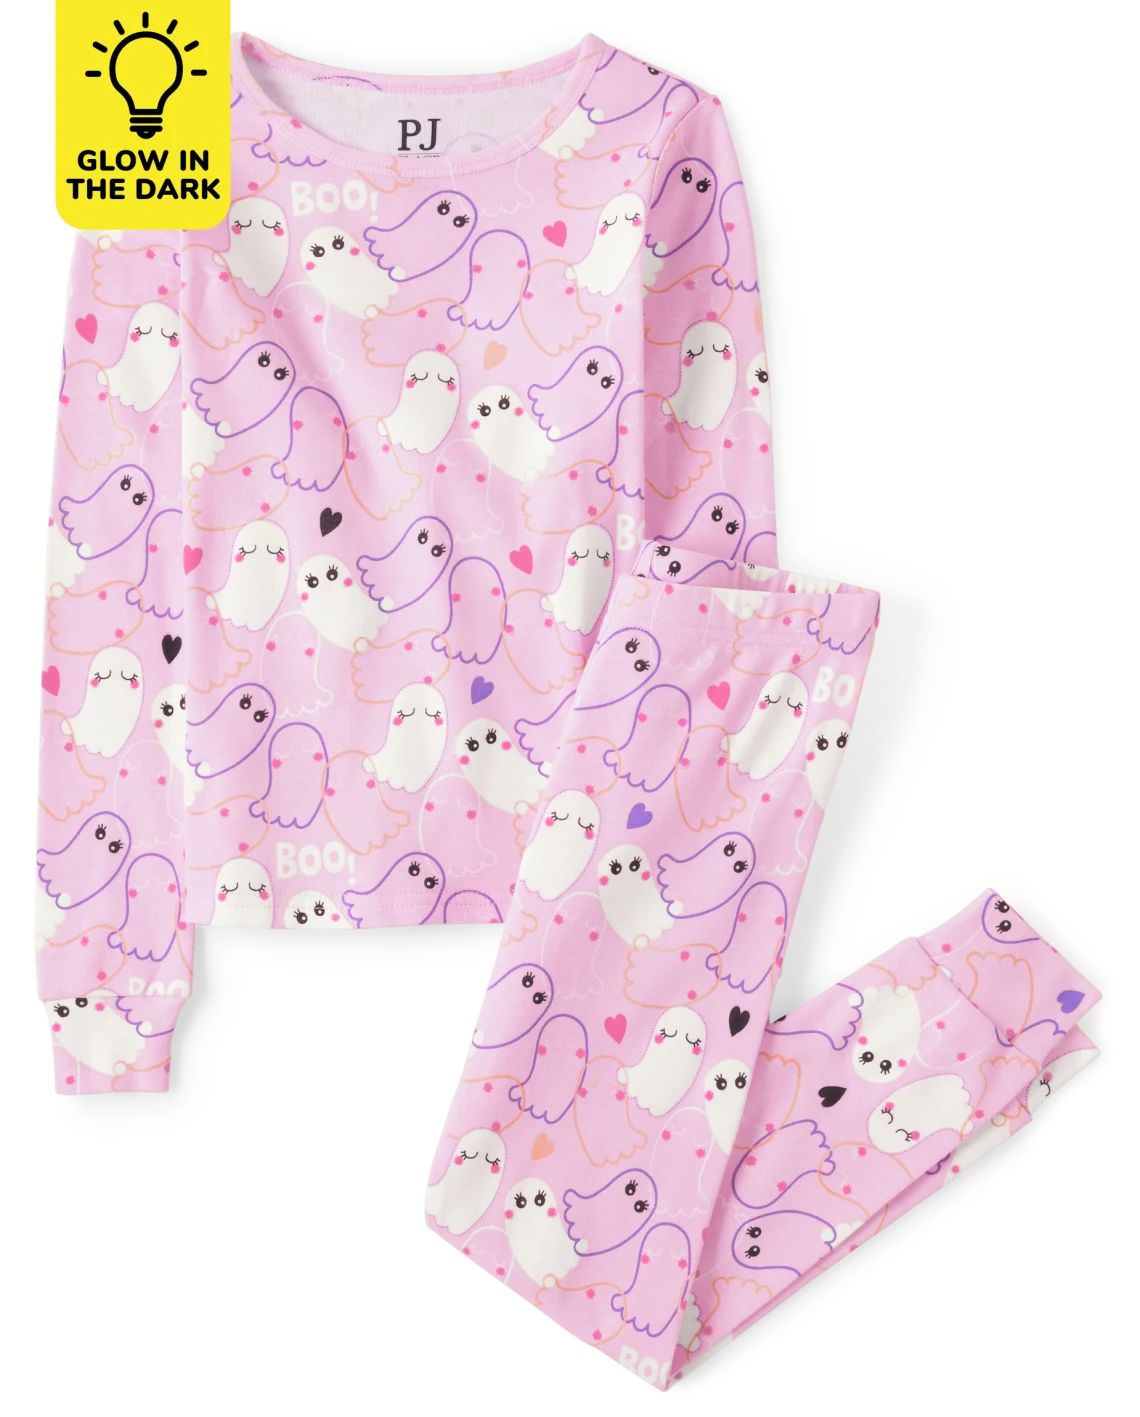 Girls Glow Ghost Snug Fit Cotton Pajamas - charisma | The Children's Place